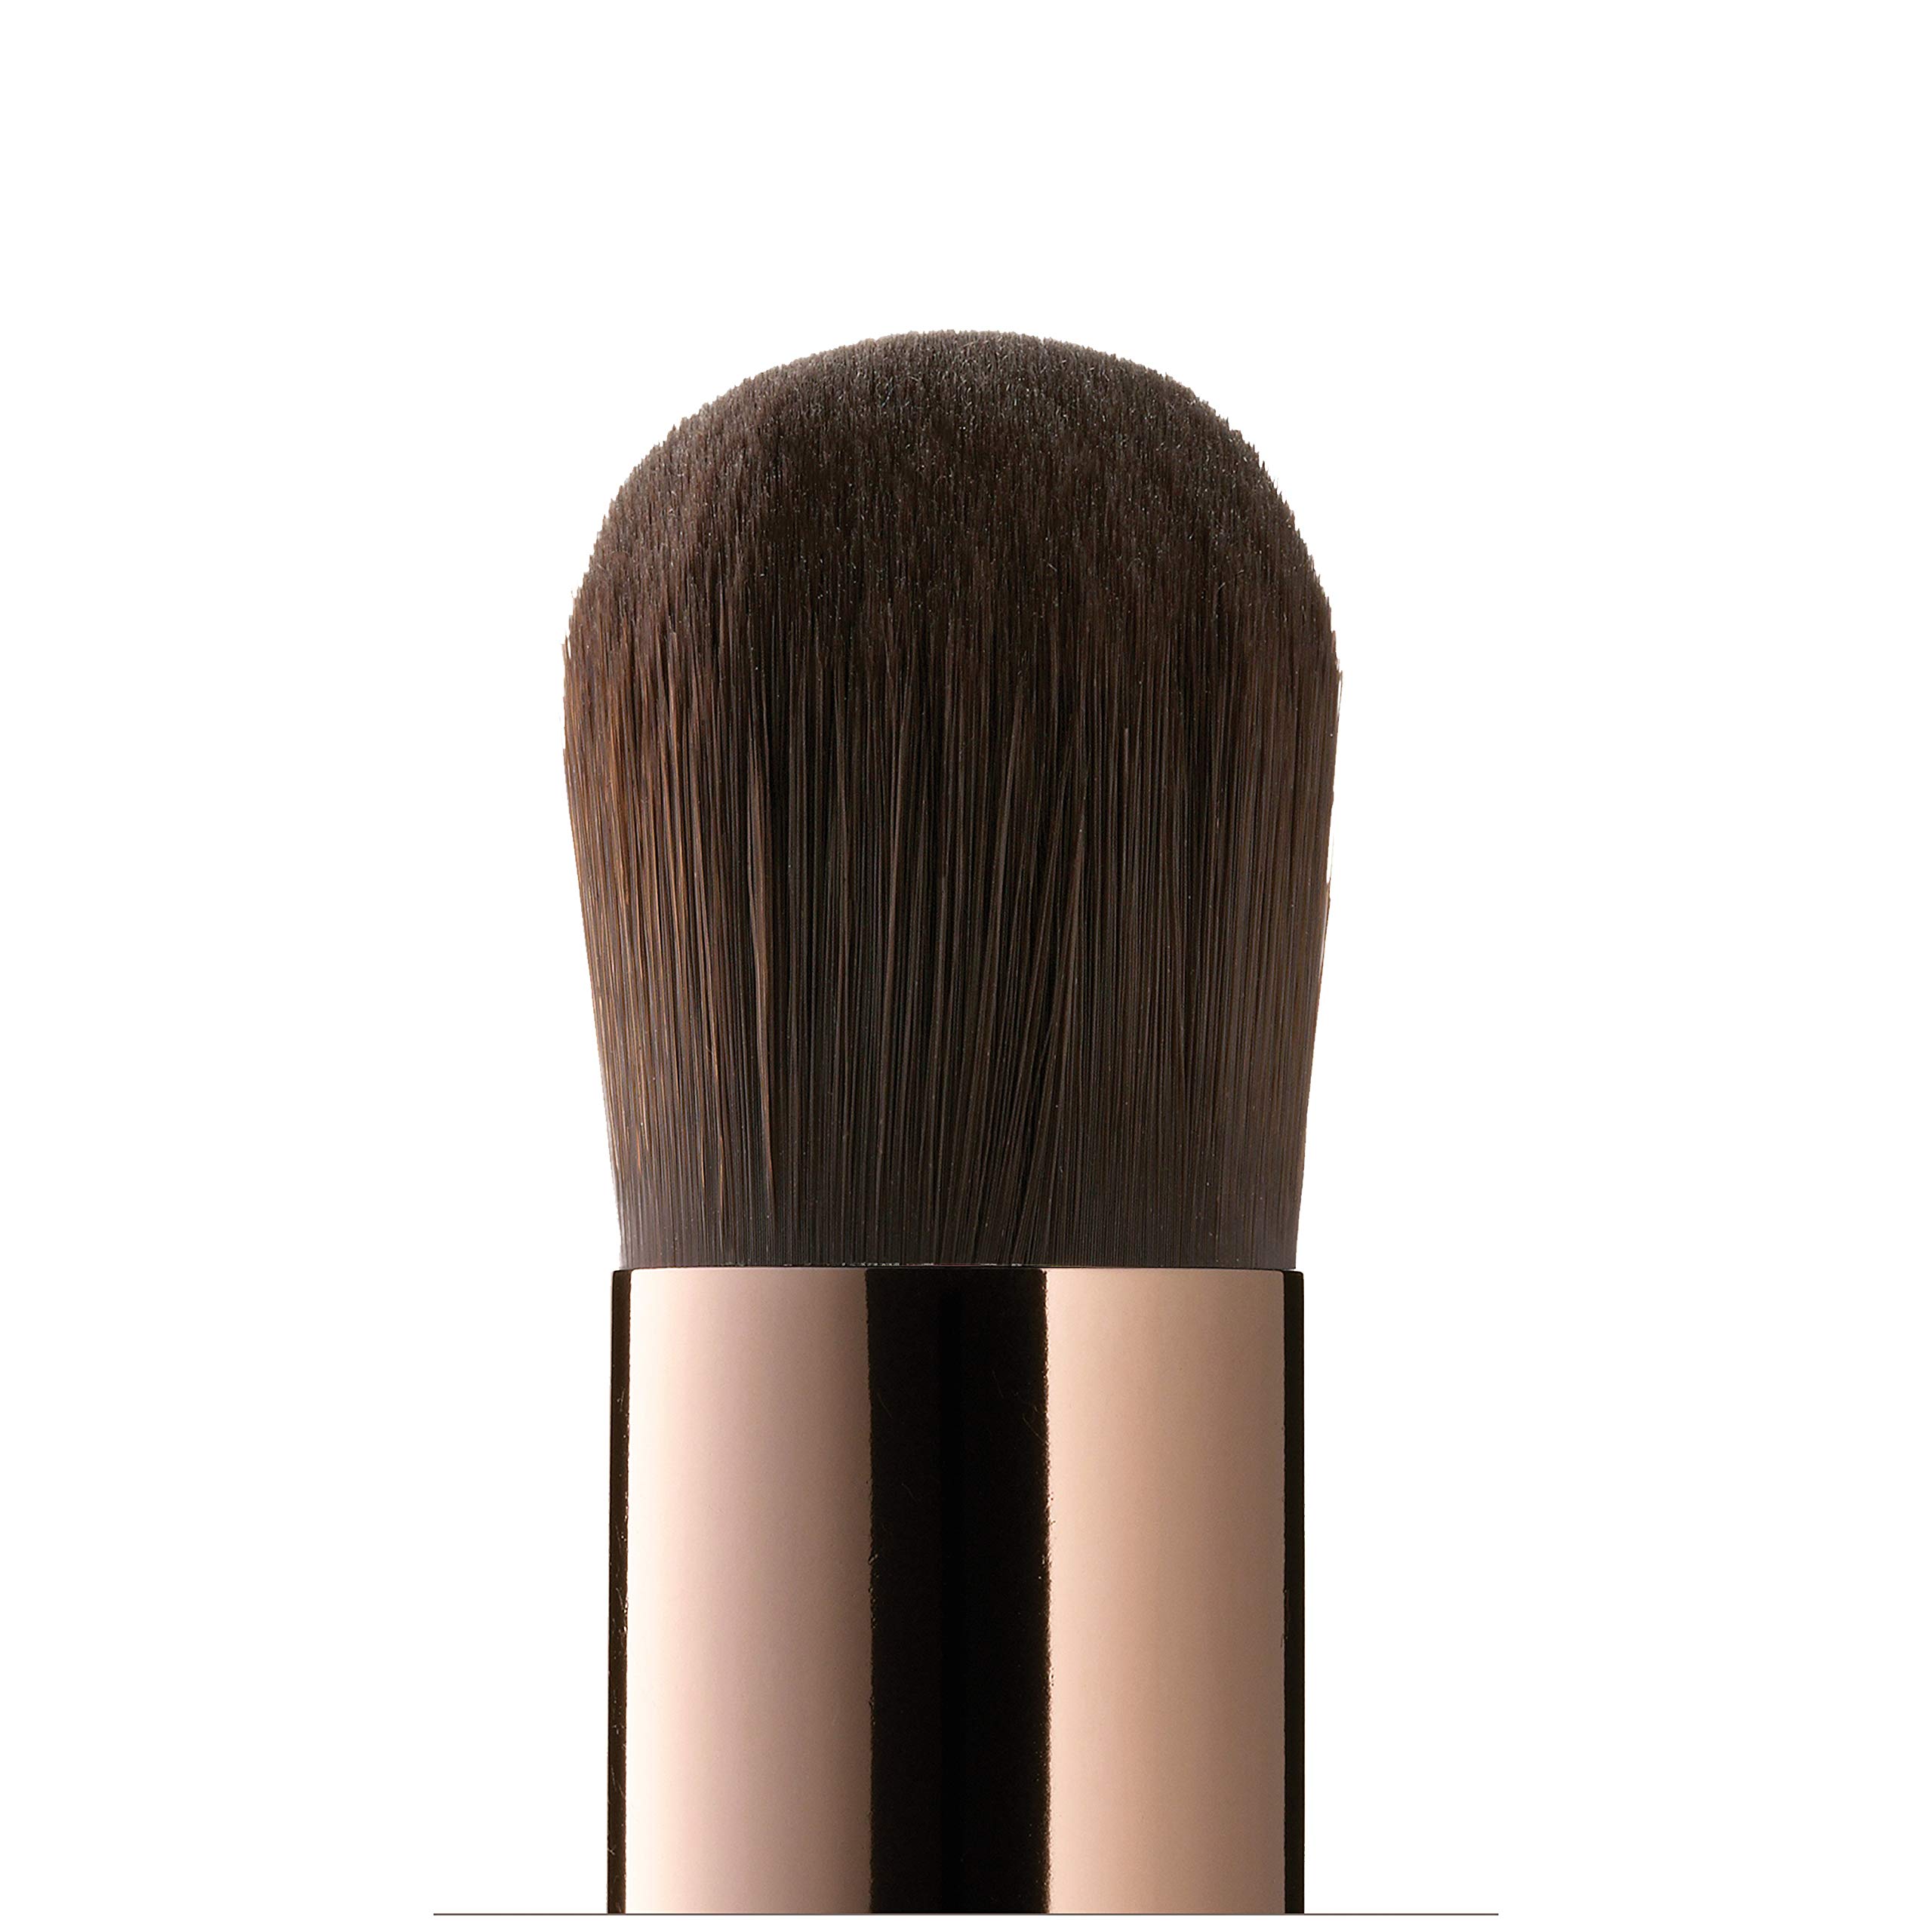 delilah - Foundation Kabuki Complexion Brush - Synthetic Fibre Liquid Blending And Buffing Makeup Tool - Wooden HAndle - For all Skin Type - Cruelty Free - 1 Pc